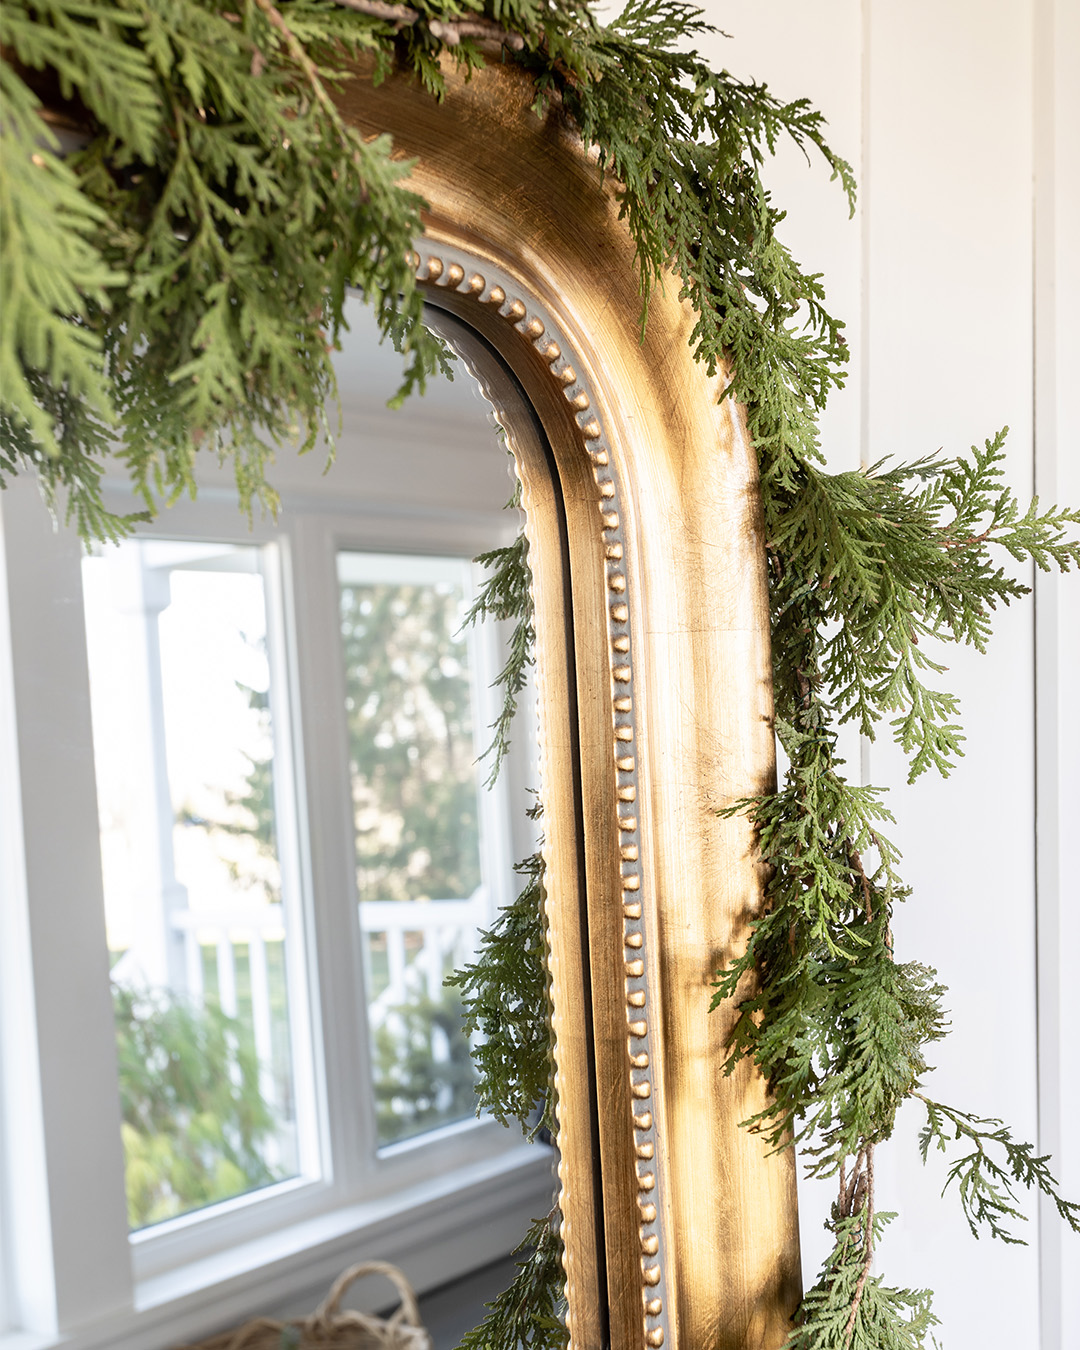 I went super simple for the mudroom this year and just headed out on a walk around the property to gather some greenery to bring a little Christmas cheer to our entryway. Here are my natural cedar Christmas decorations in our mudroom.